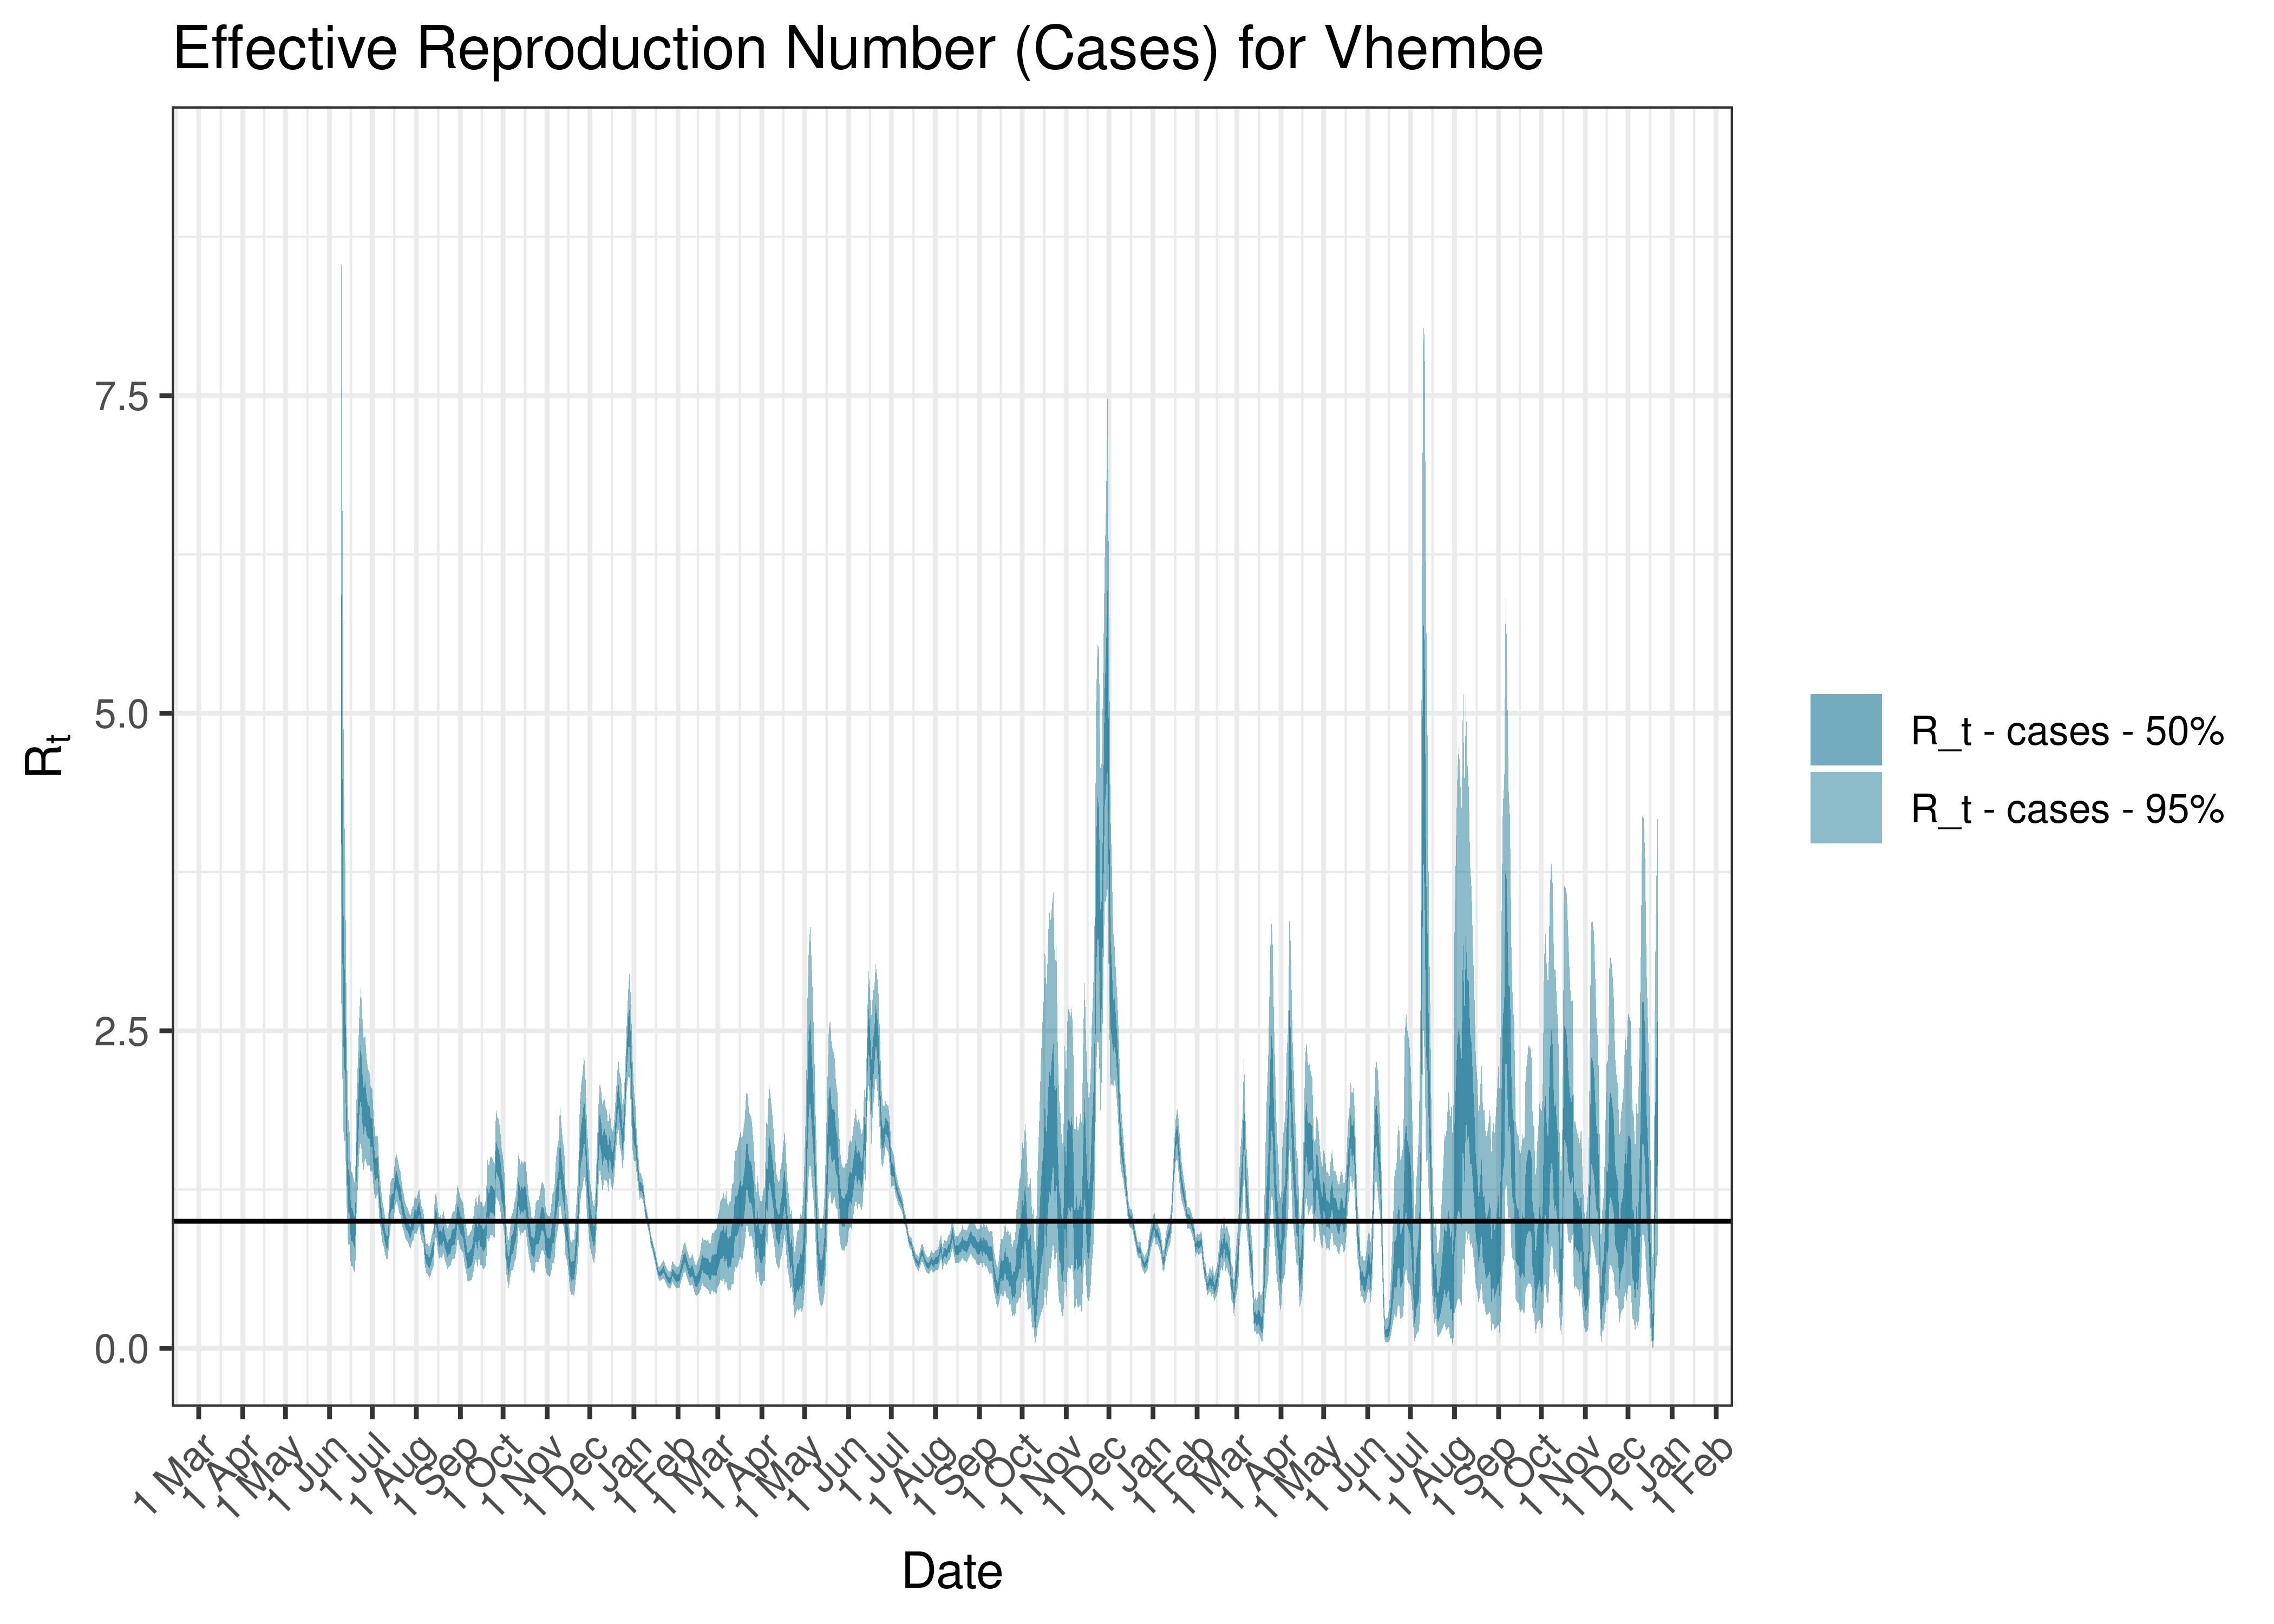 Estimated Effective Reproduction Number Based on Cases for Vhembe since 1 April 2020